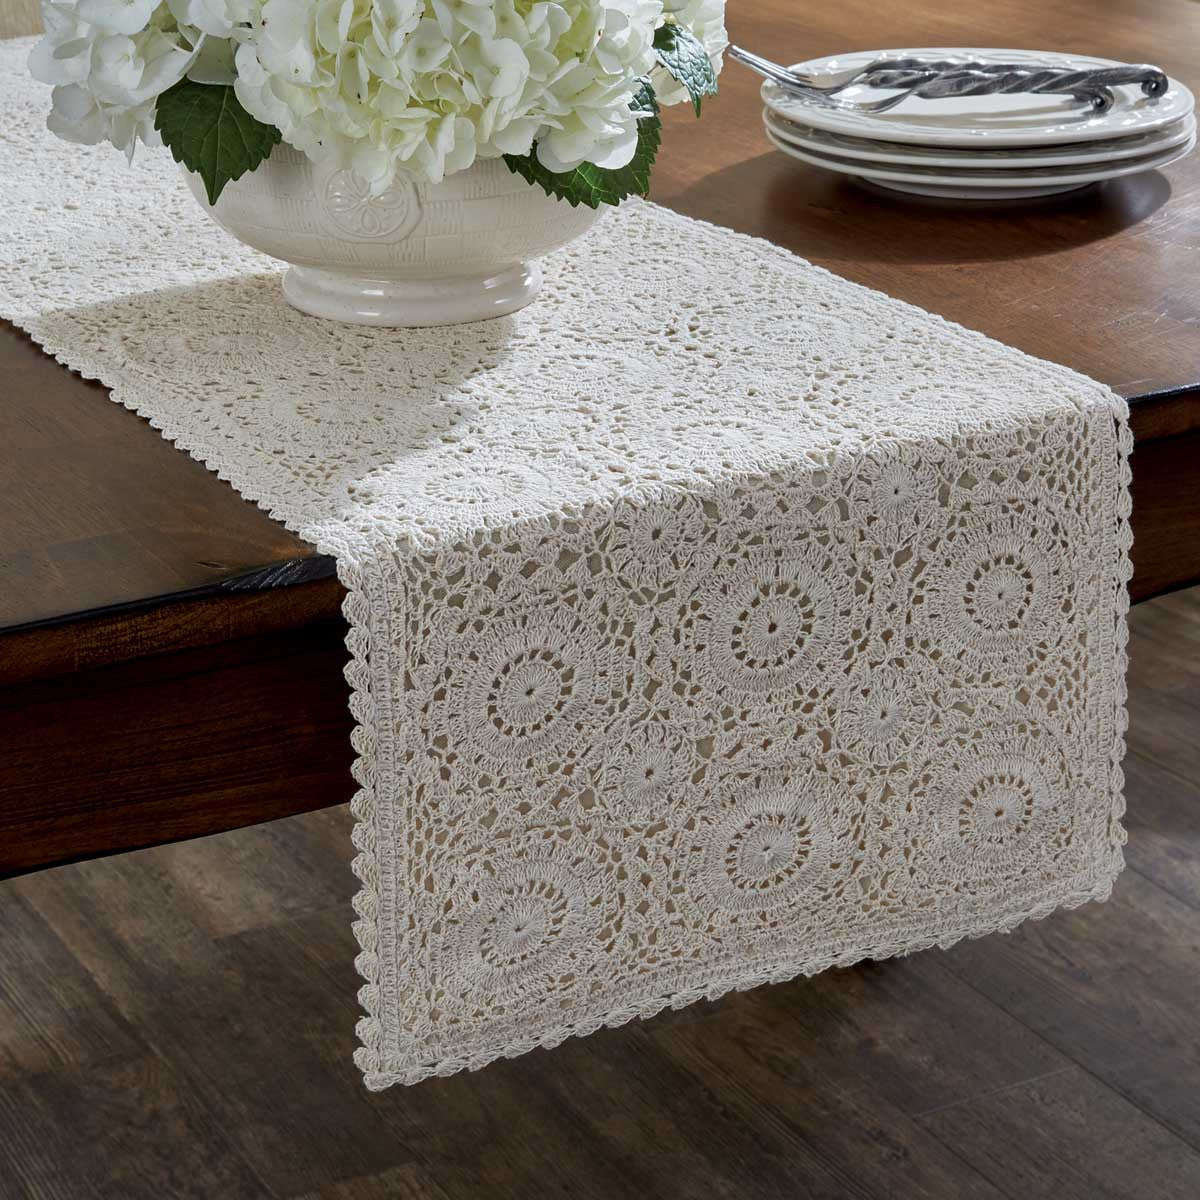 Lace Table Runner - Cream 13" x 36" Park Designs